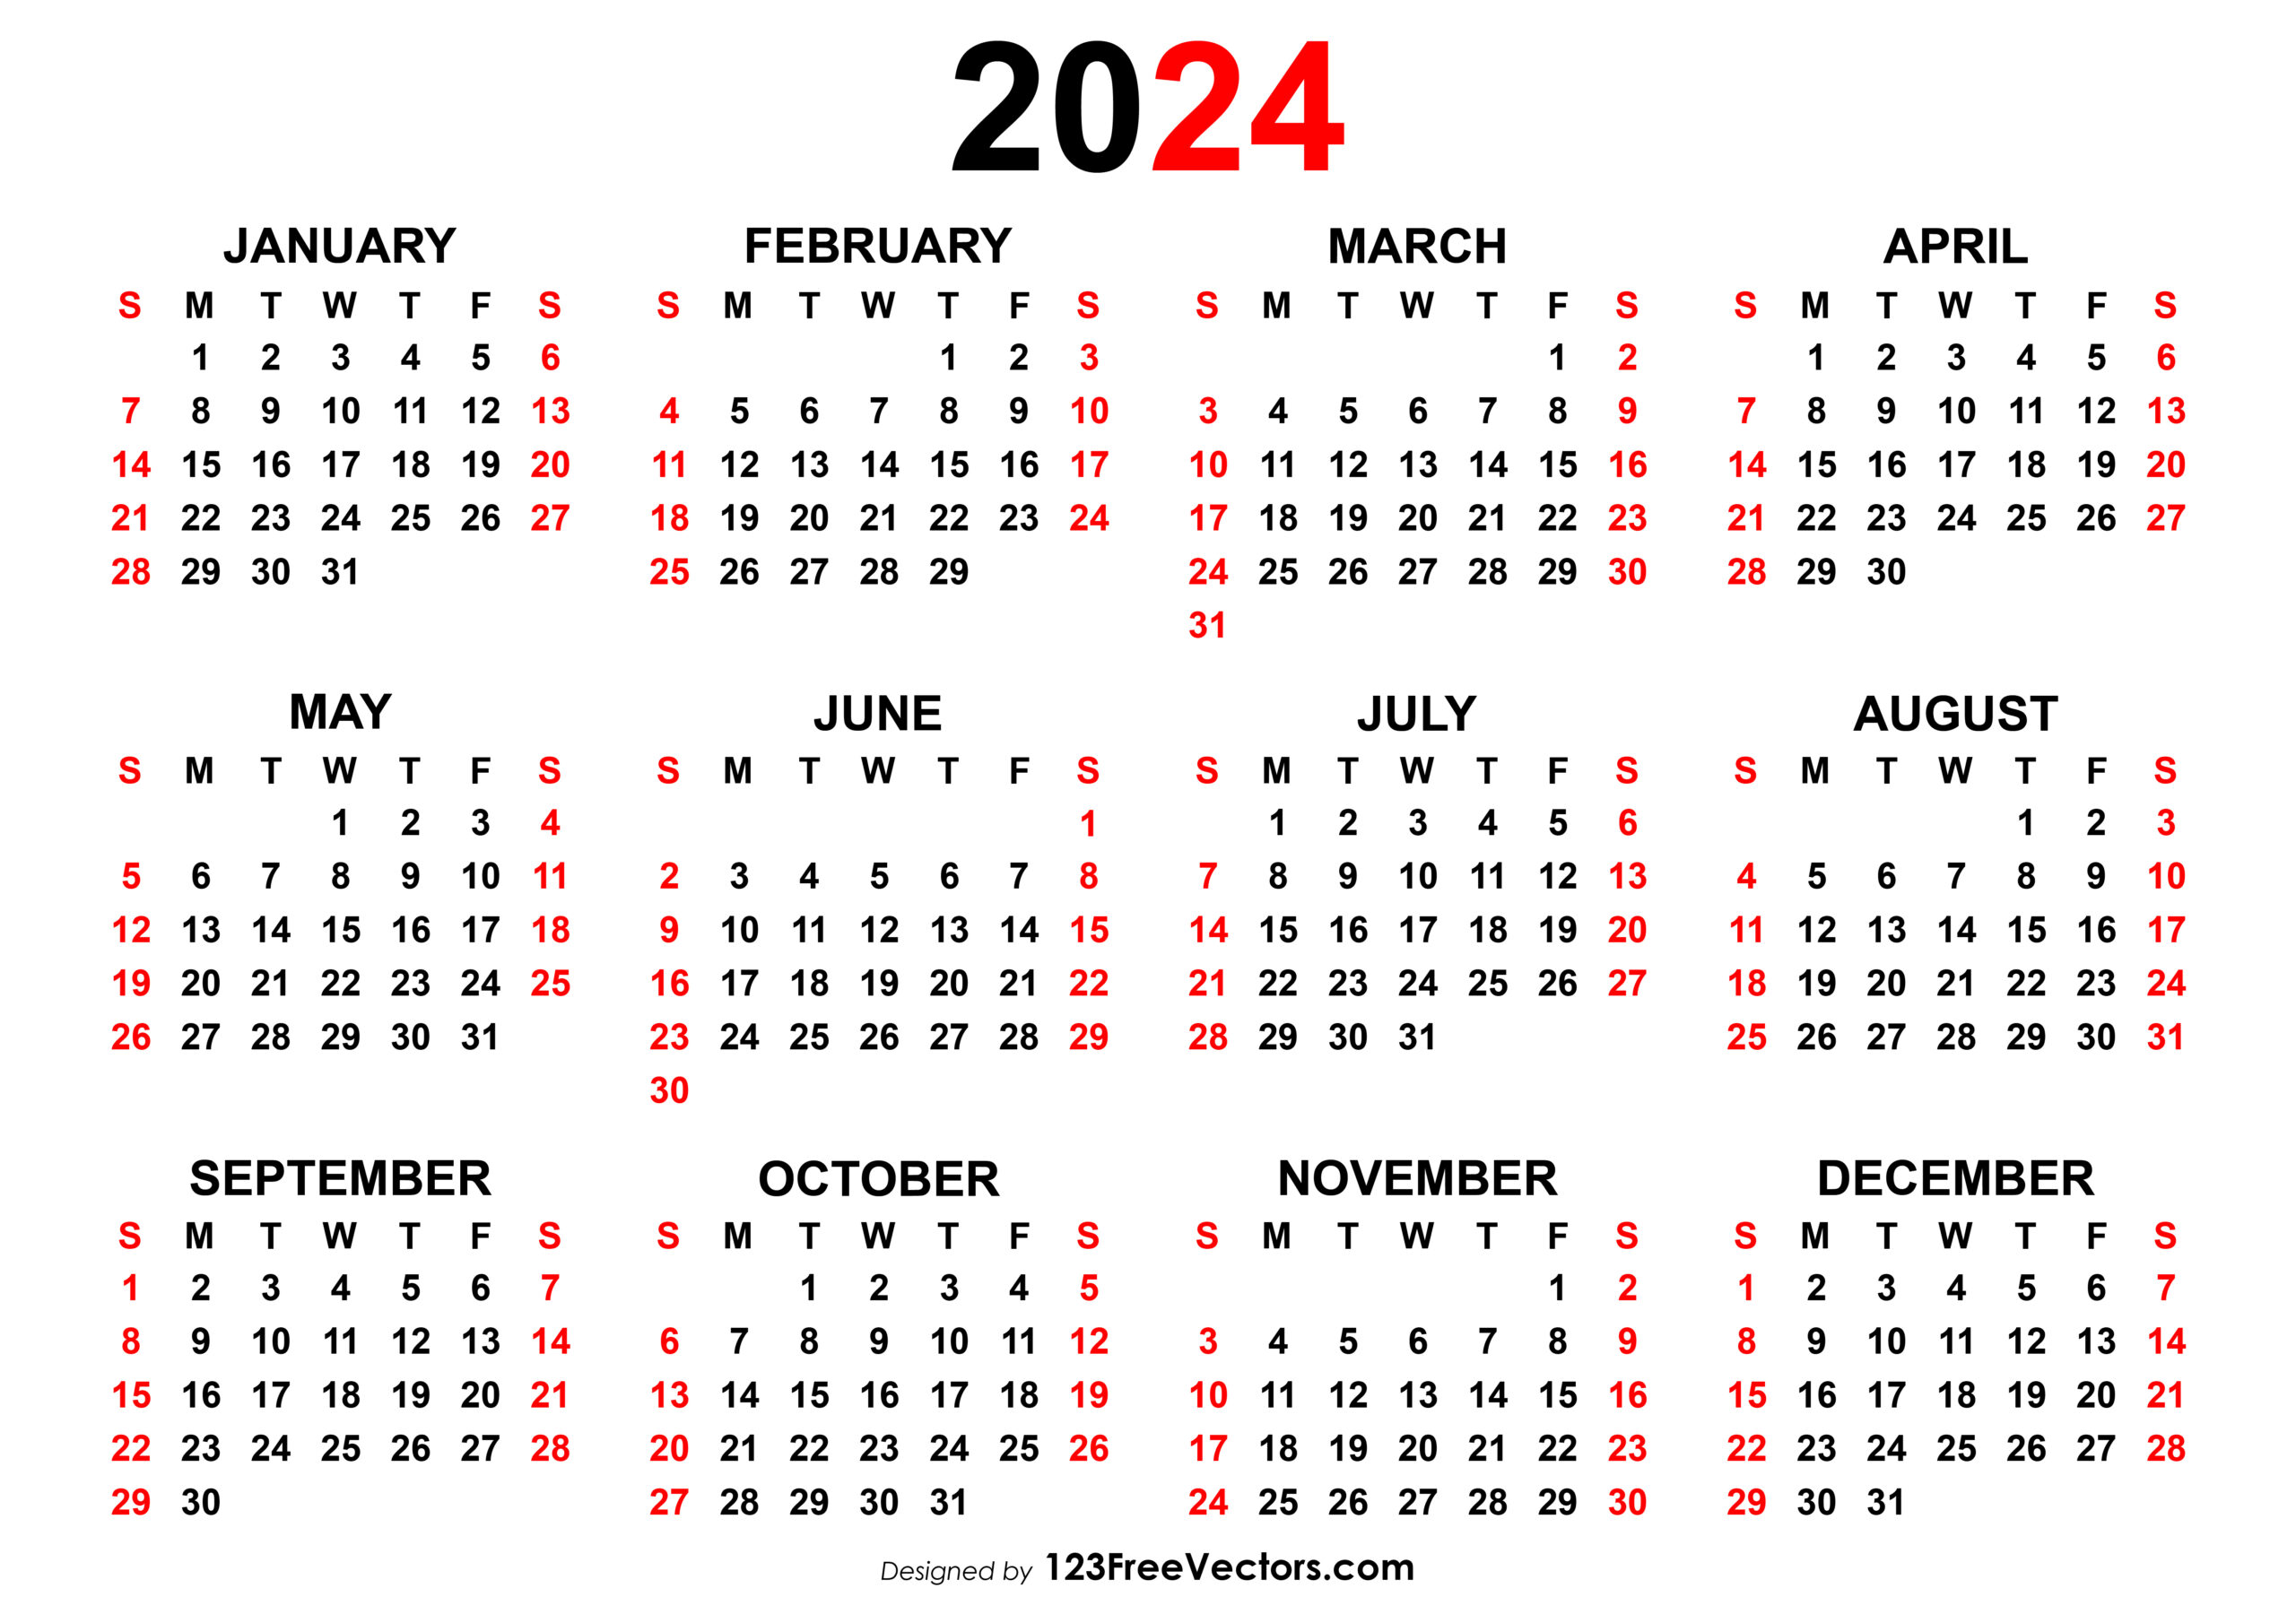 Free Yearly Calendar 2024 | Yearly Overview Calendar 2024